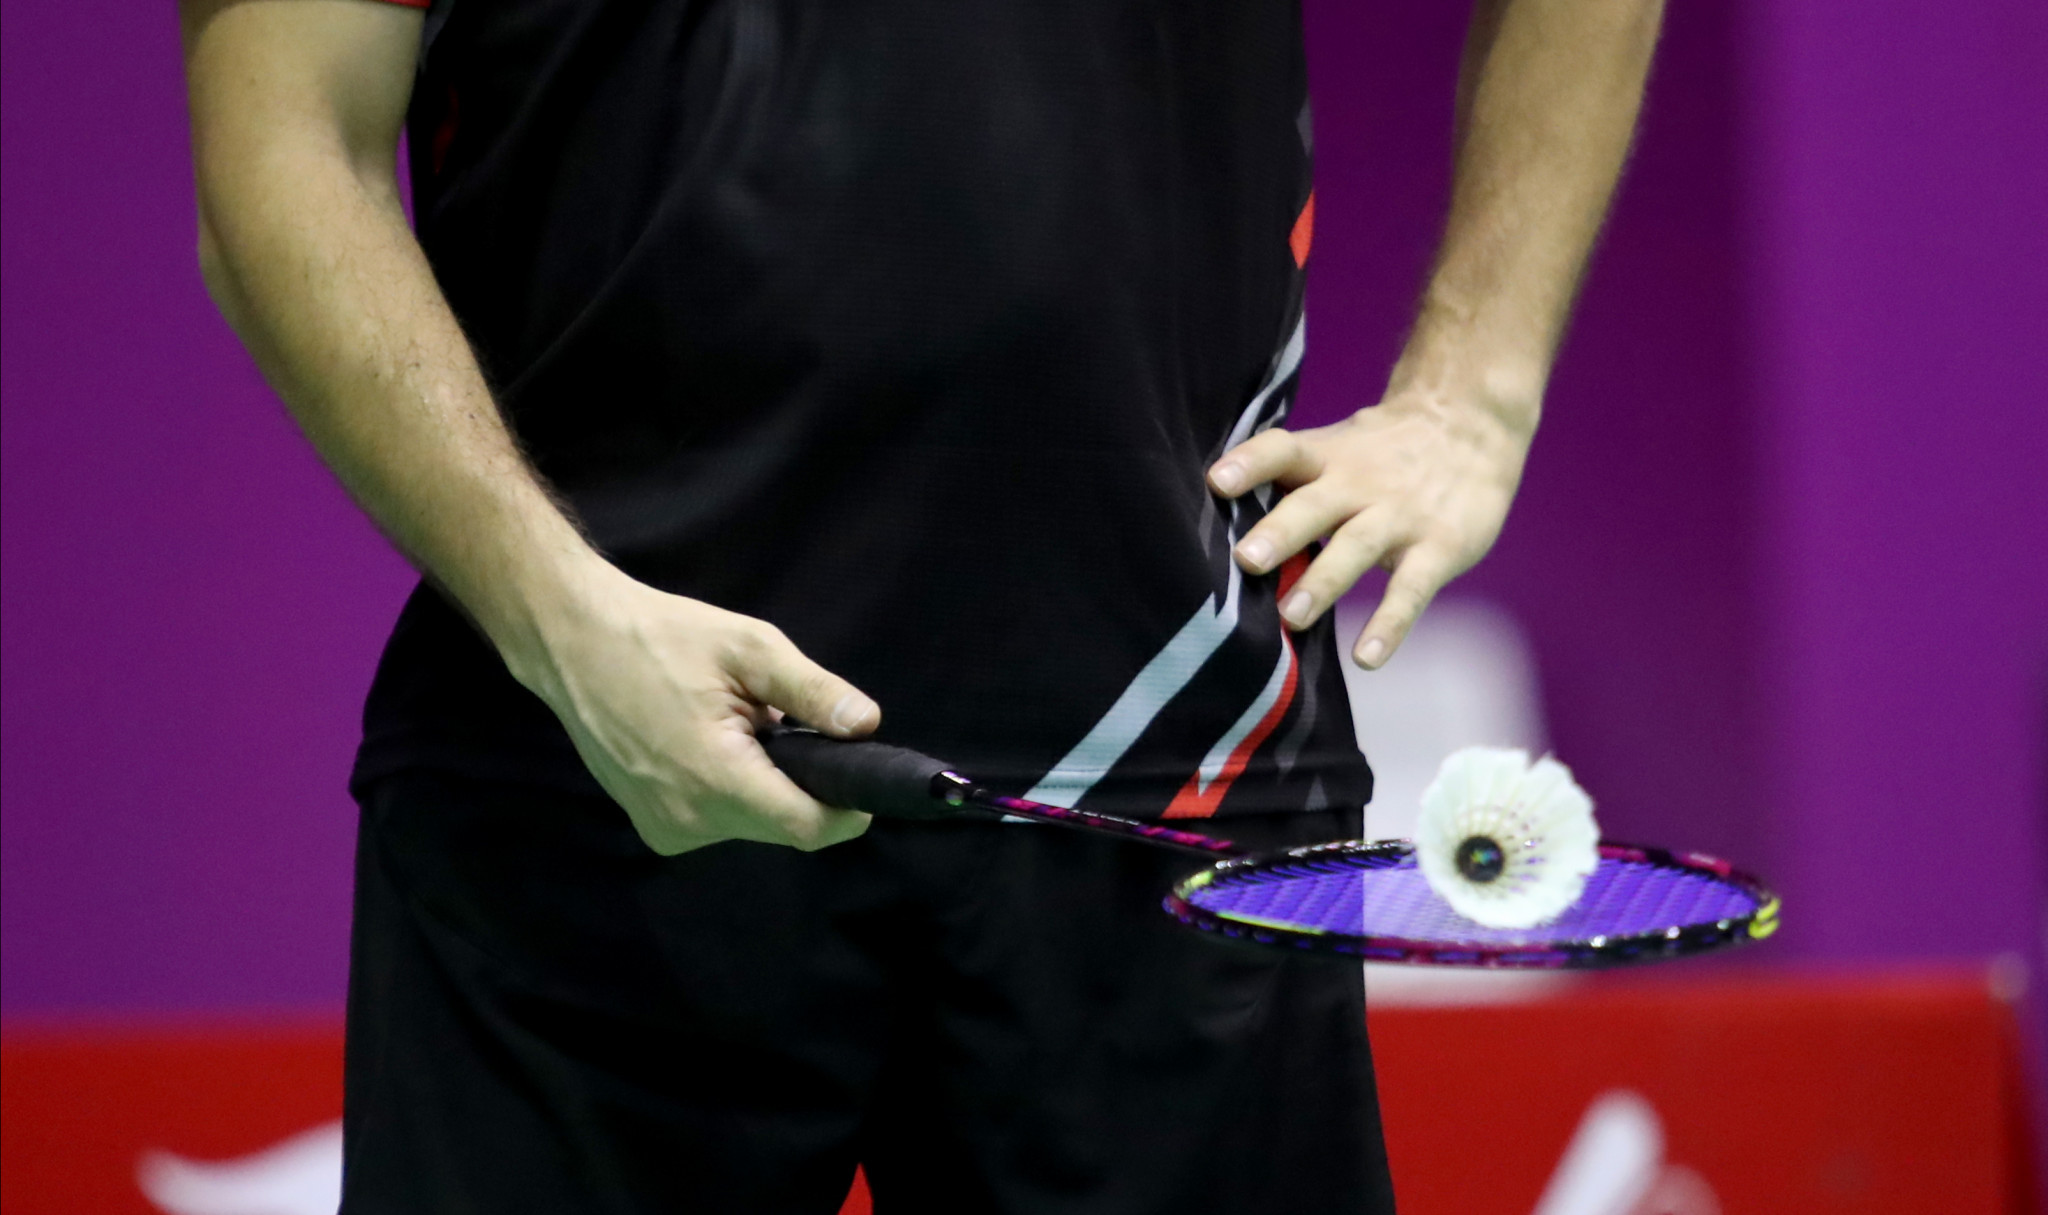 The Spanish Para Badminton International is the last event offering Paralympic ranking points ©Getty Images